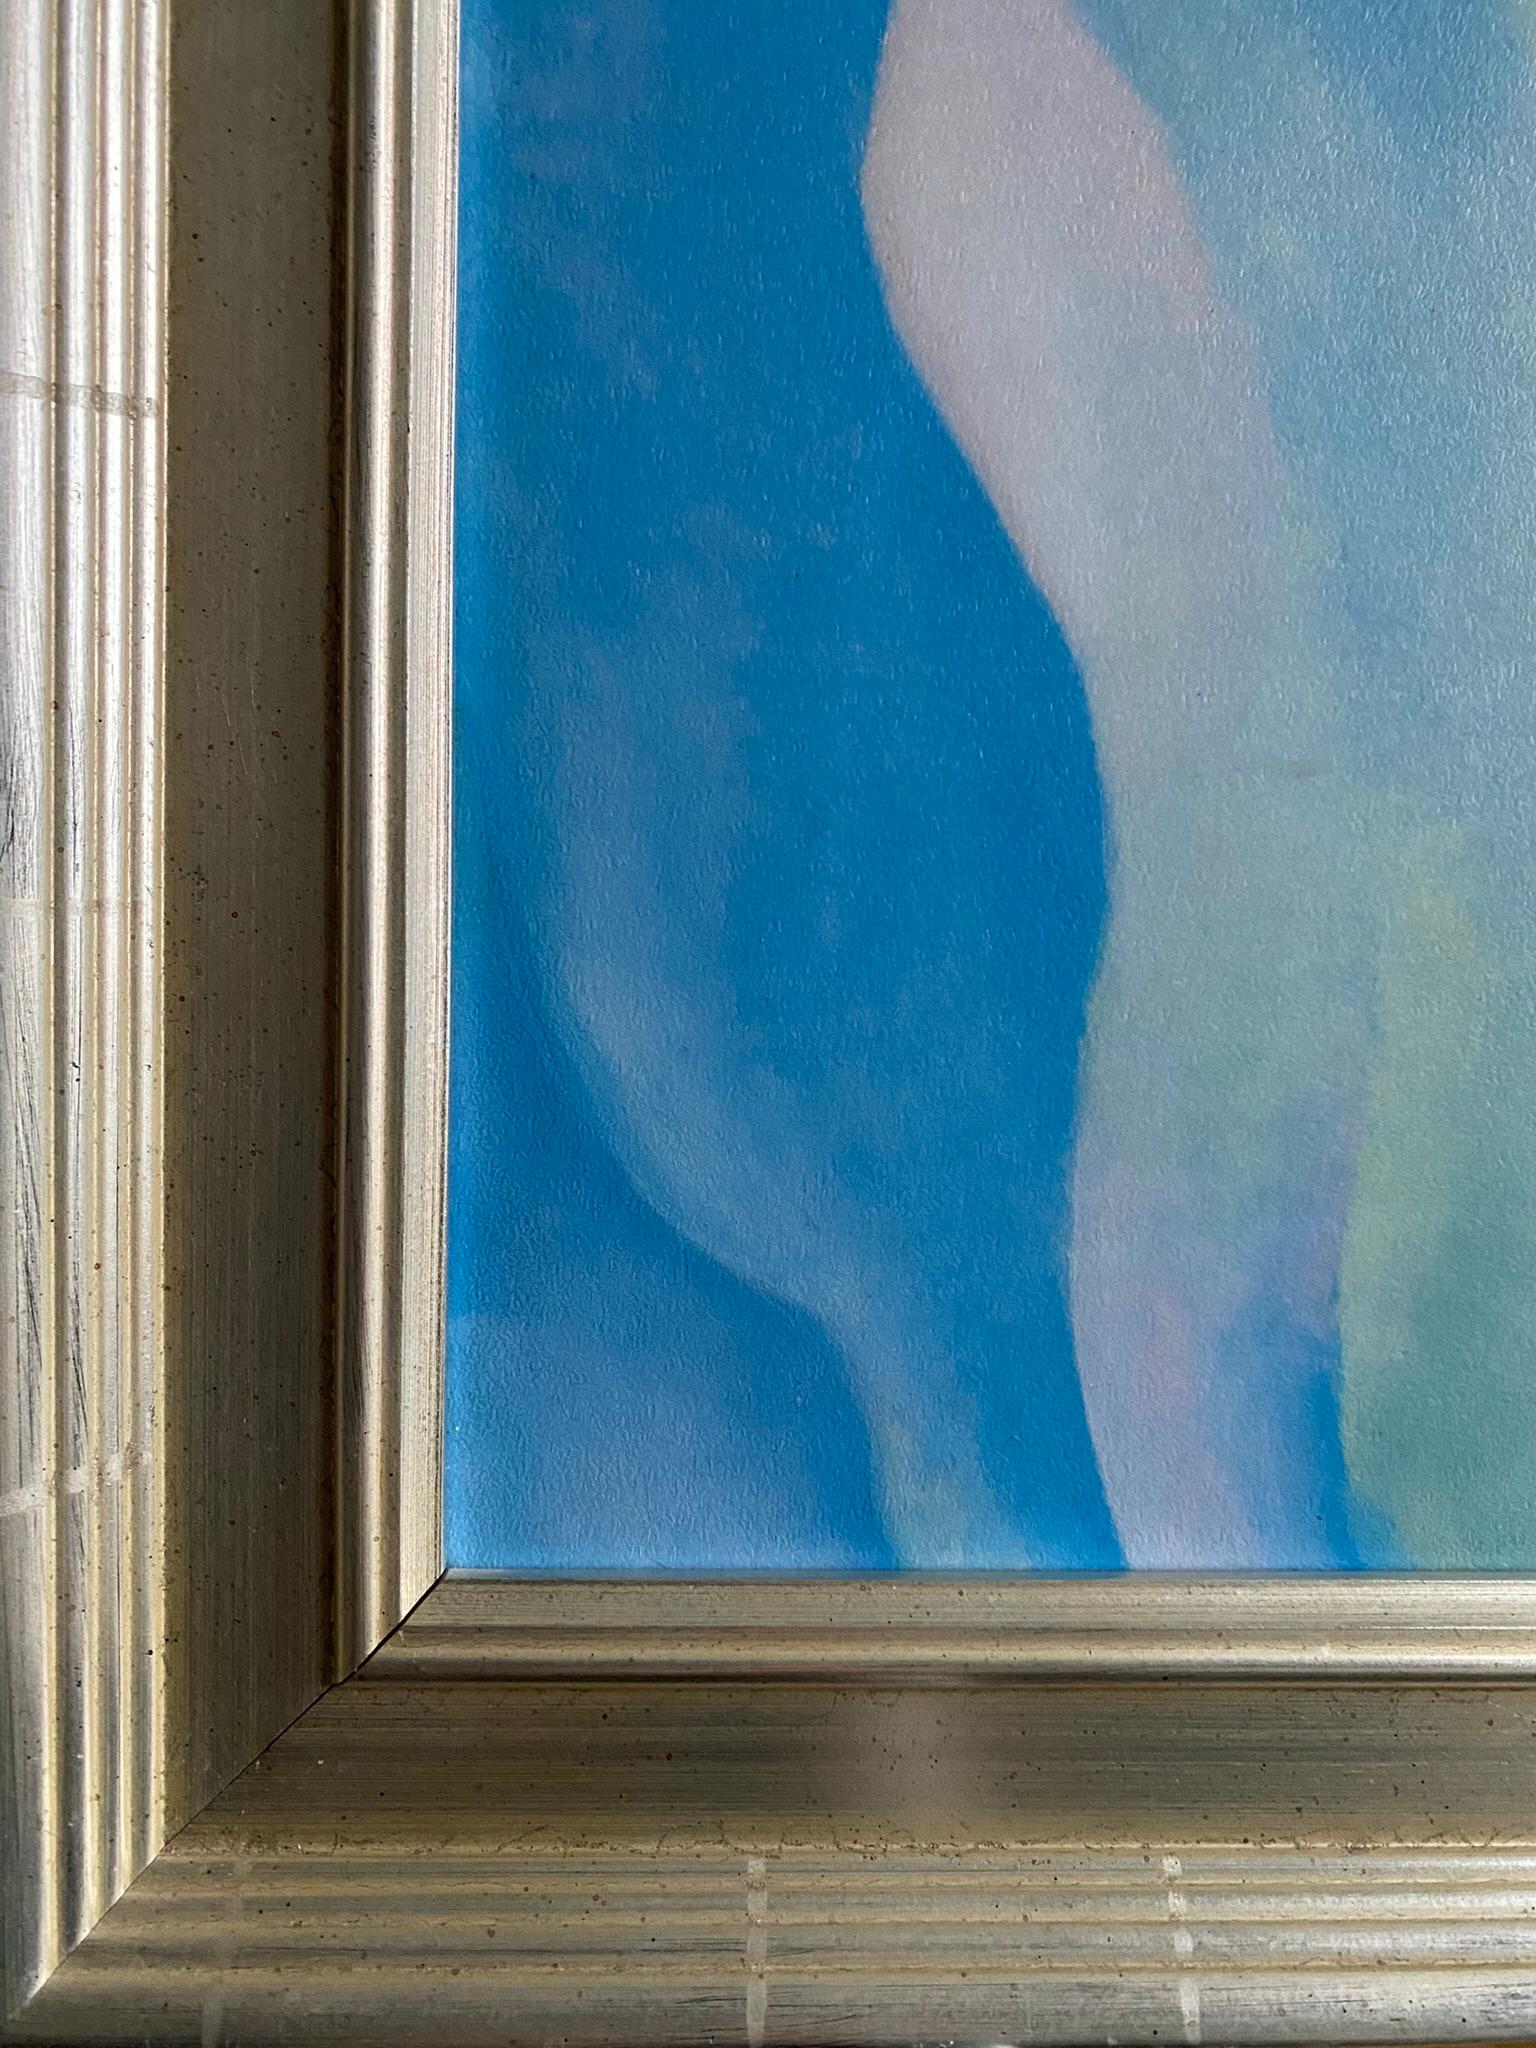 Georgia O'Keeffe-High Quality print by MoMA circa1997-Abstraction Blue-GSYStudio For Sale 6